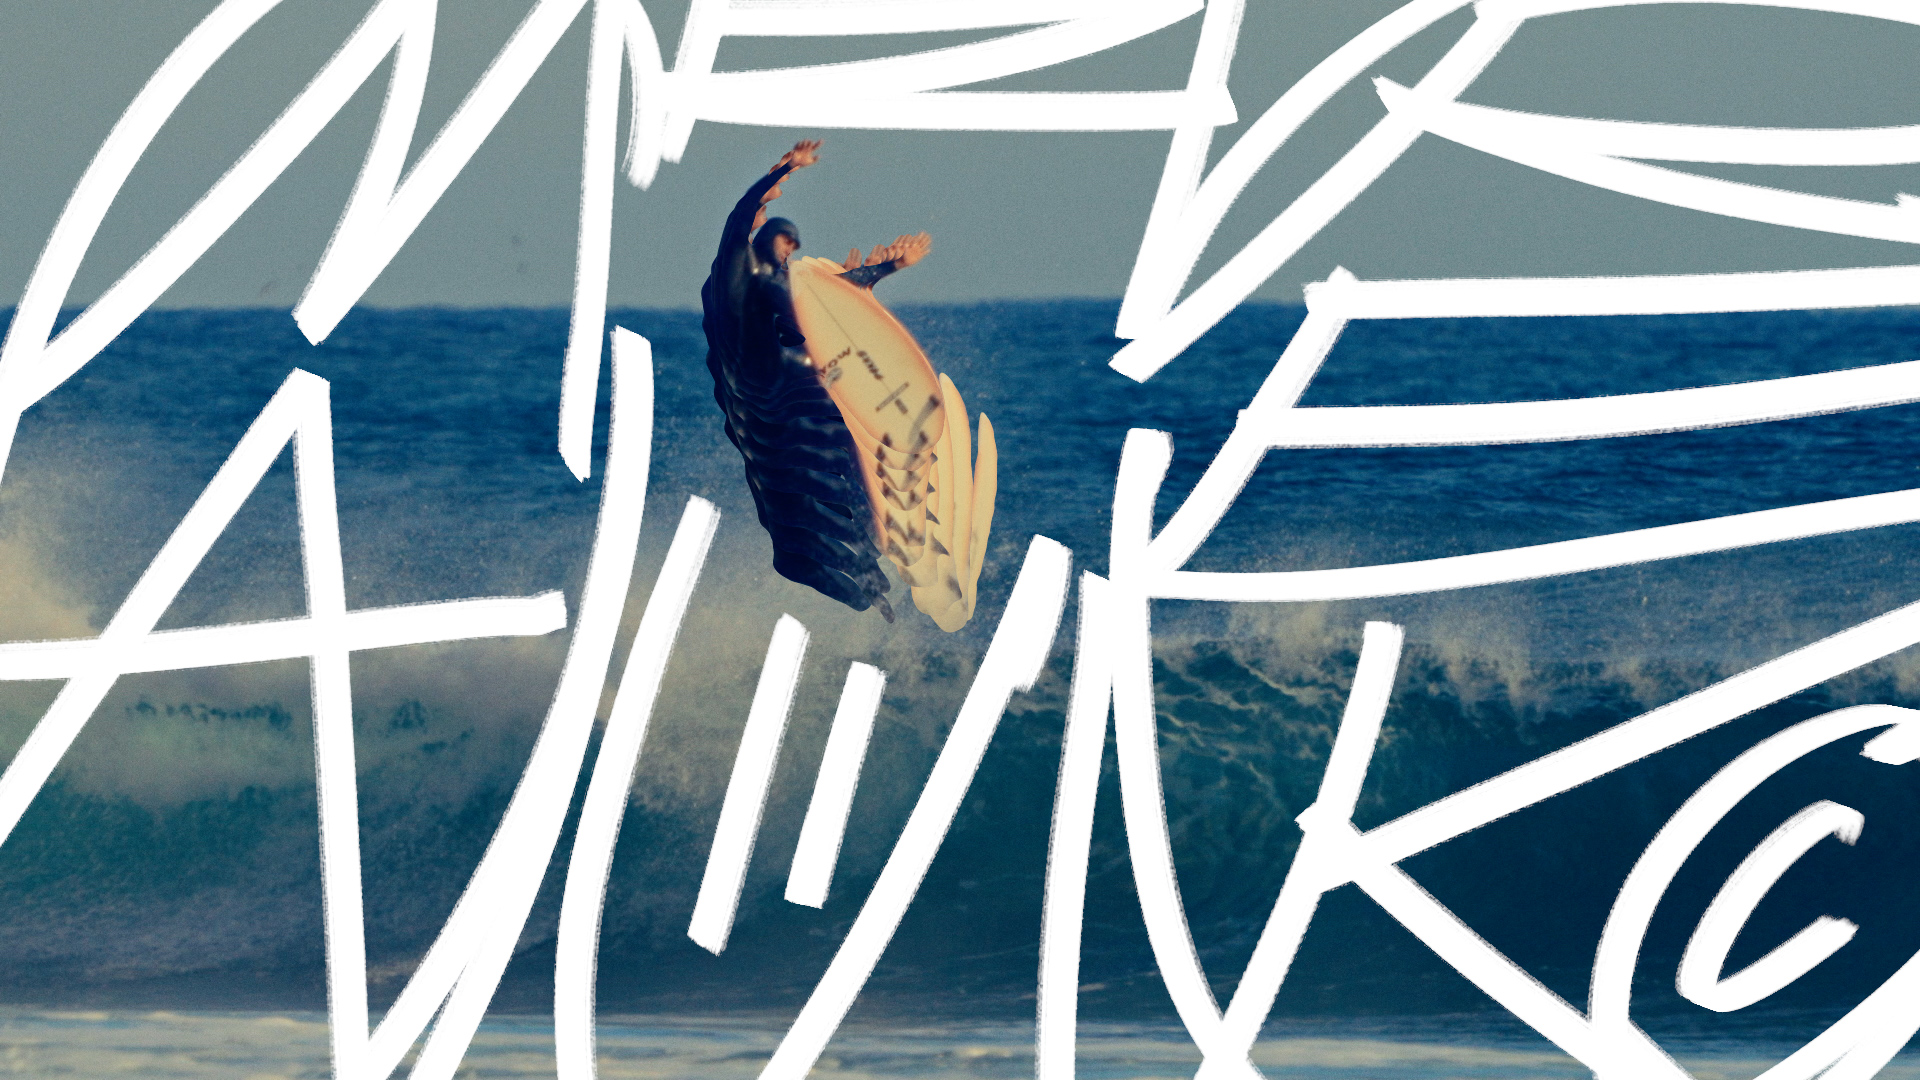 UP TO YOU! , the surf film of a Chile trip directed by Antonio Bretones